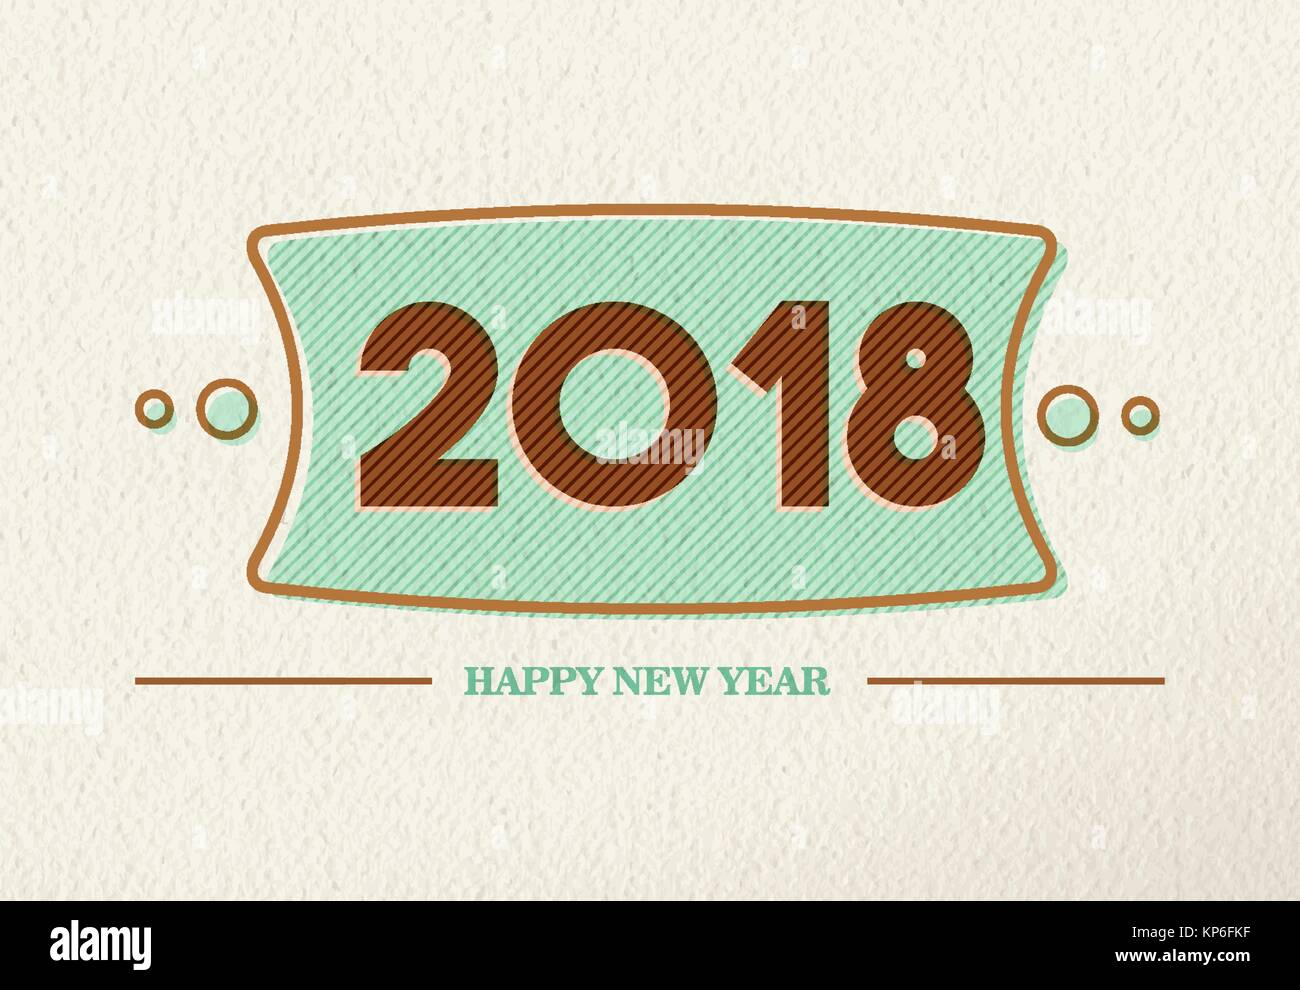 Happy New Year 2018 number typography greeting card illustration with vintage style holiday quote. EPS10 vector. Stock Vector